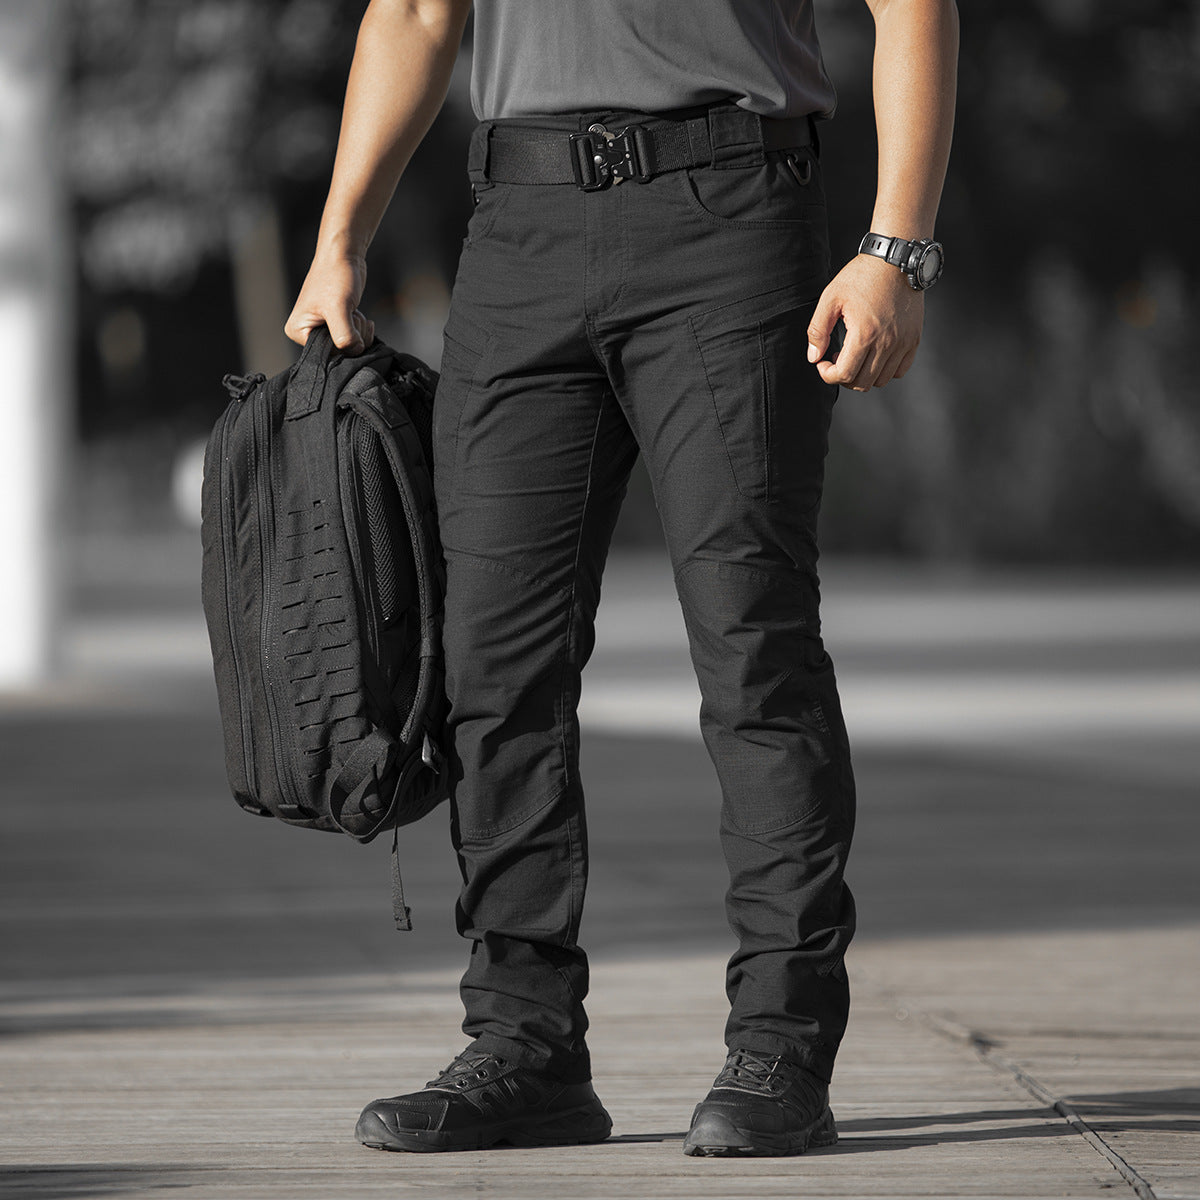 Urban Pro Second Generation Stretch Tactical Pants